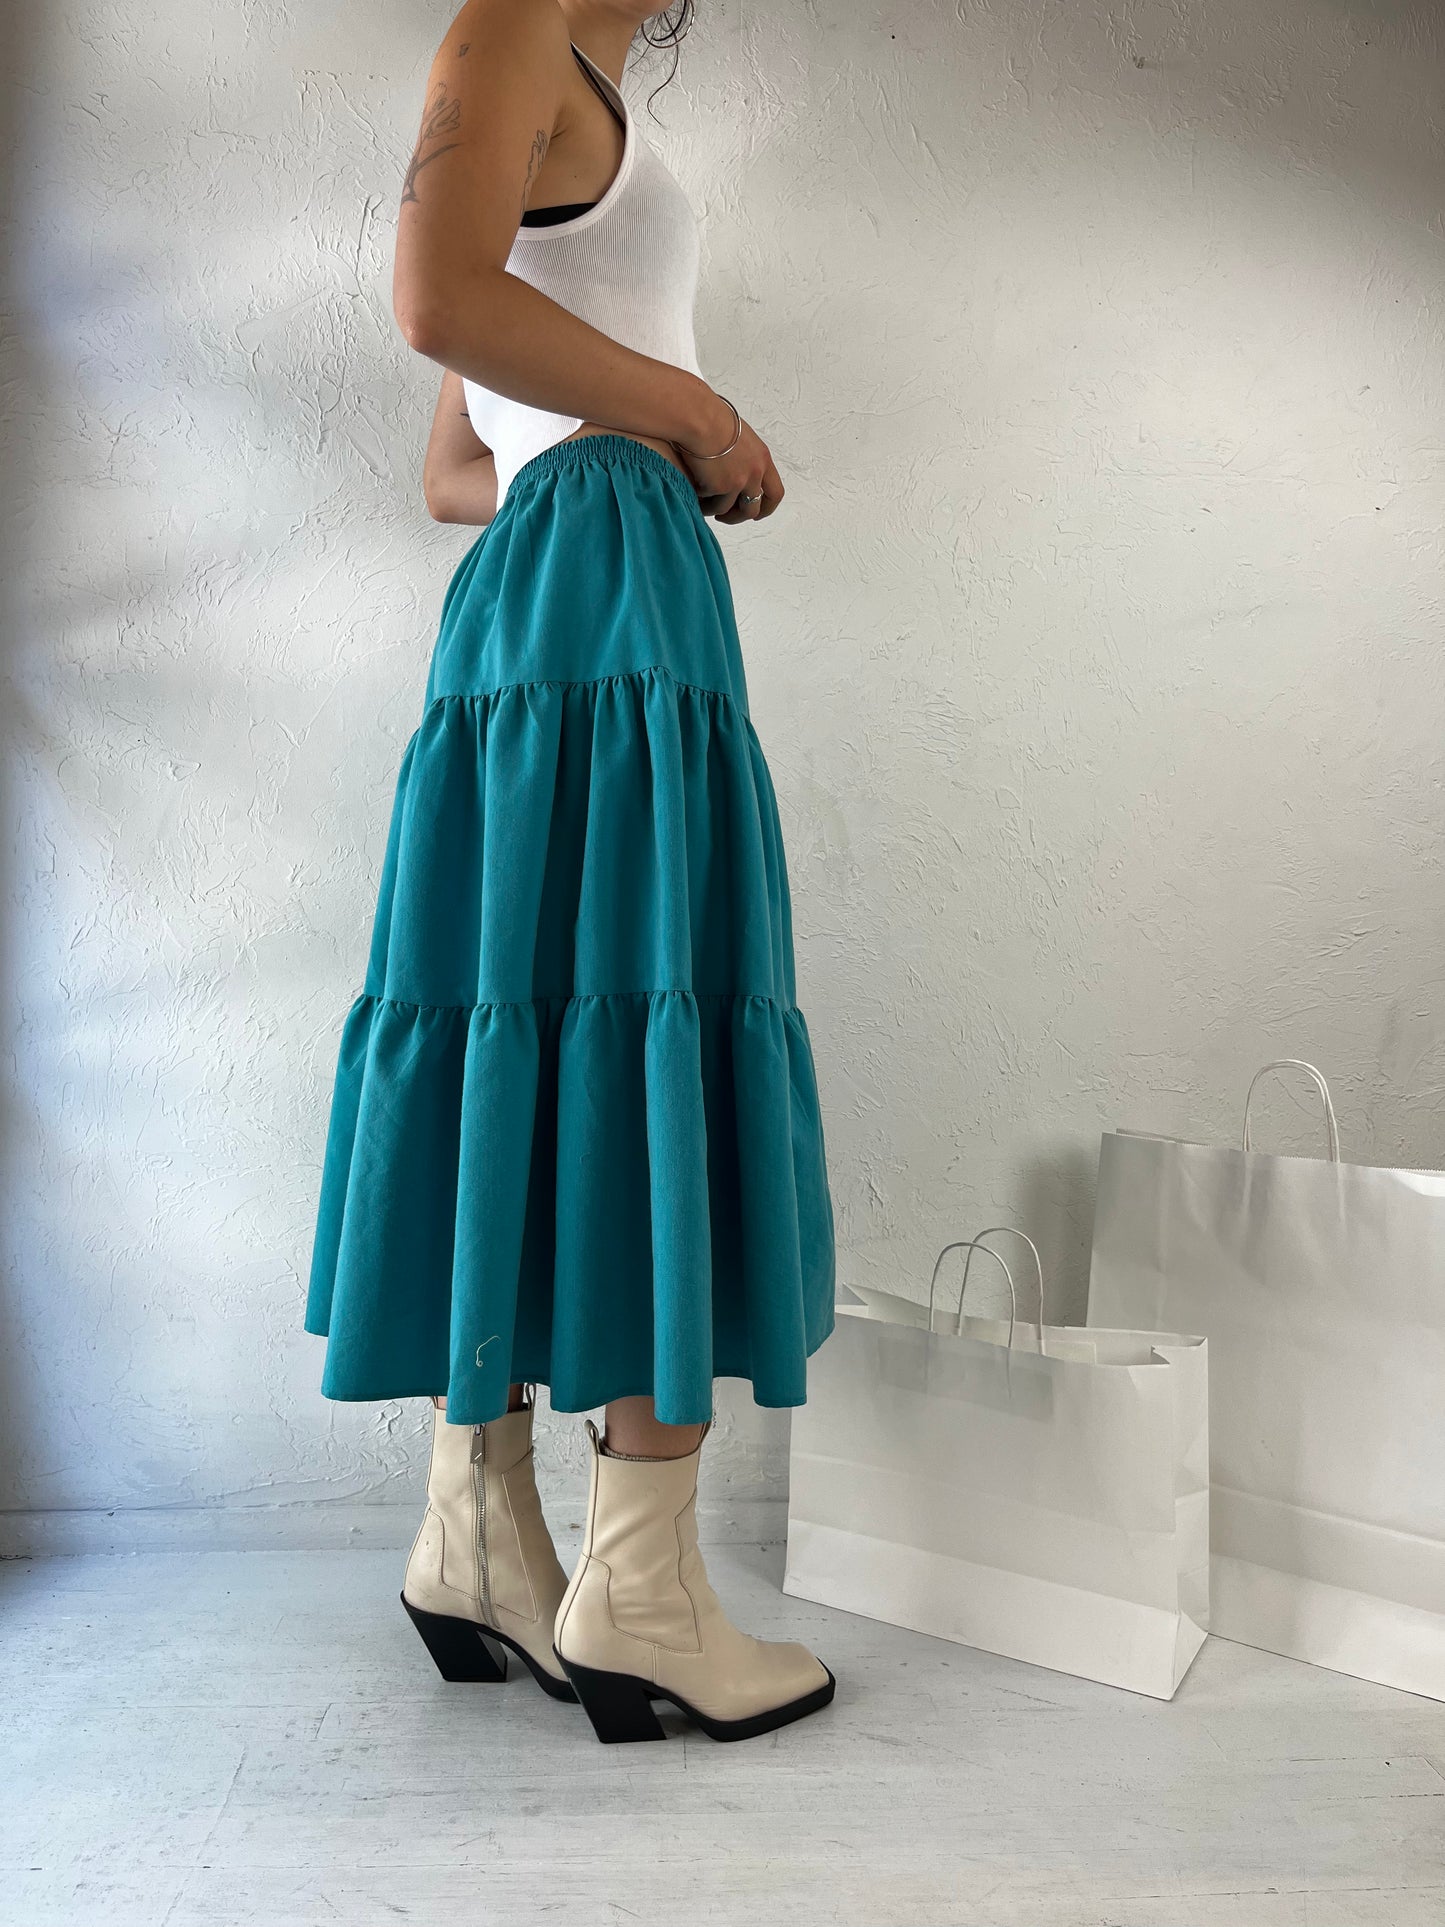 90s Teal Blue Peasant Skirt / Small